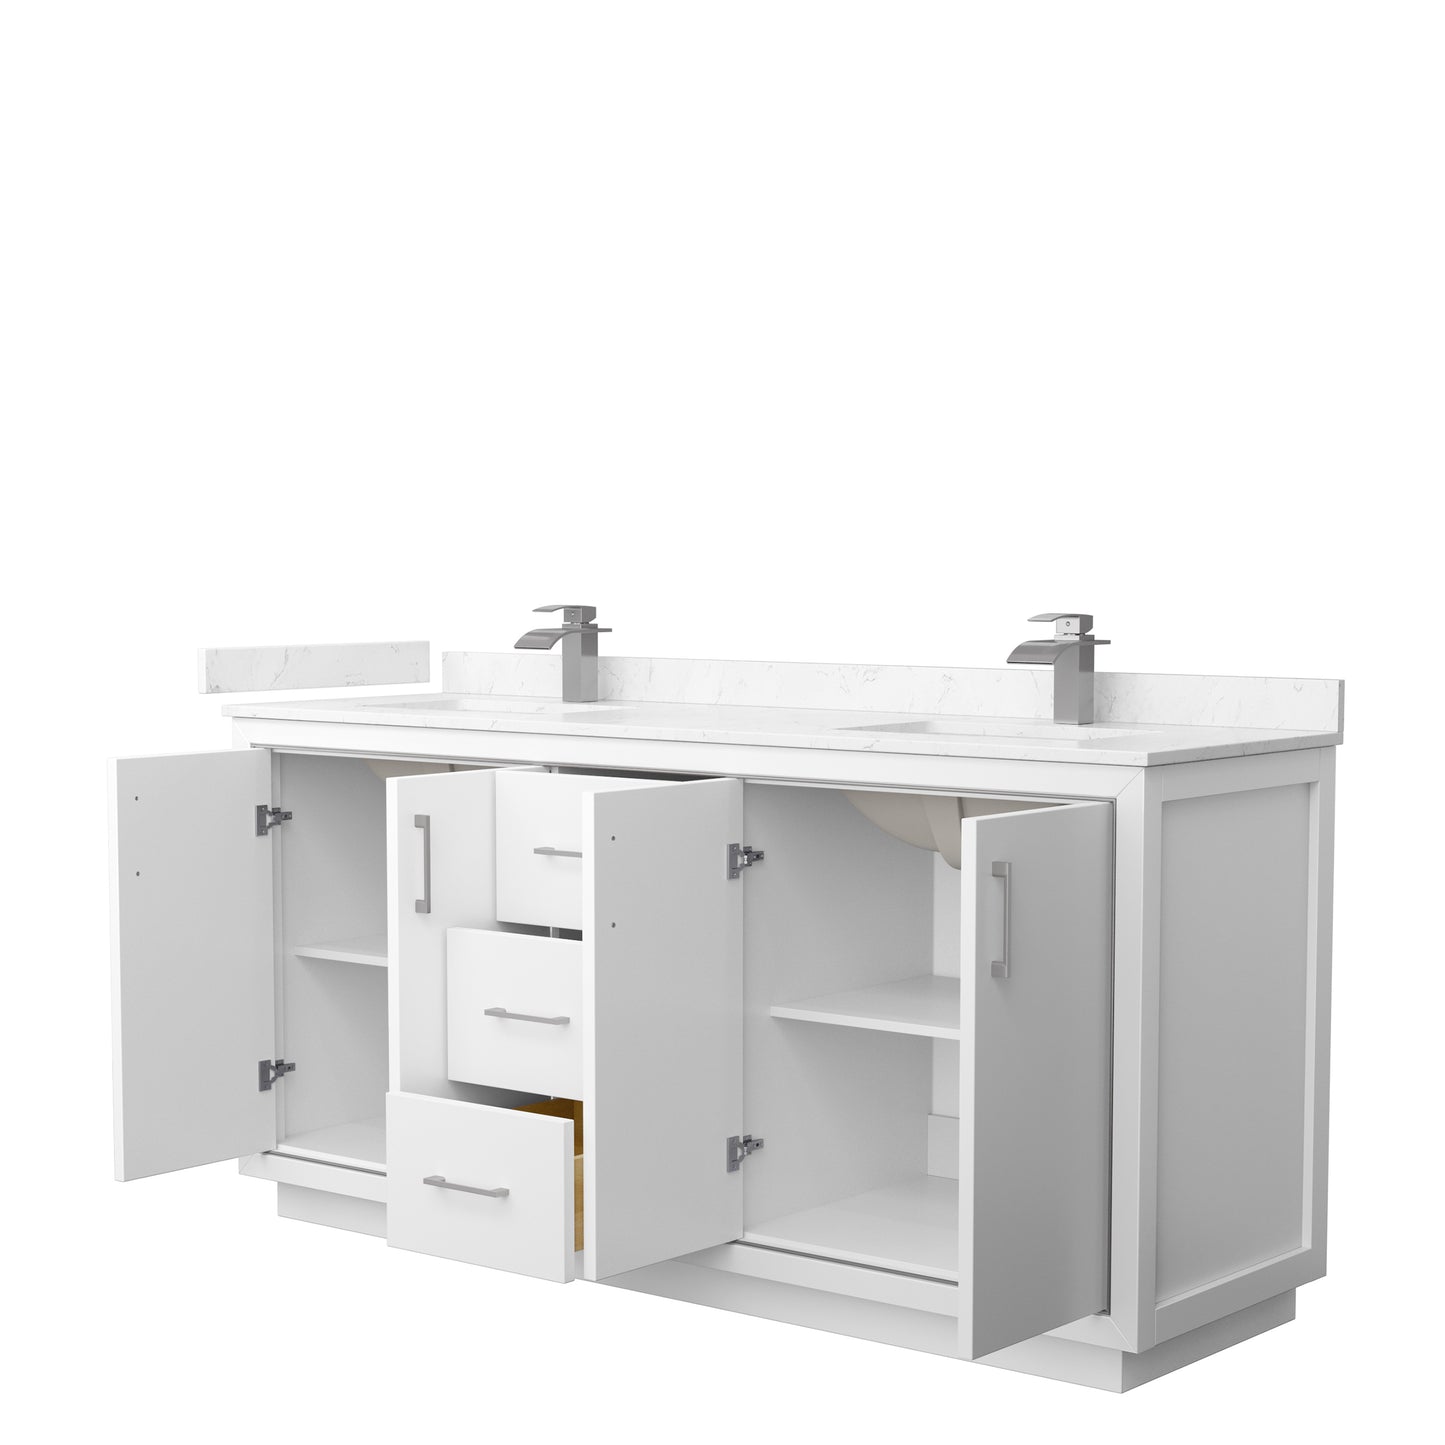 Wyndham Icon 72 Inch Double Bathroom Vanity Carrara Cultured Marble Countertop with Undermount Square Sinks and Brushed Nickel Trim - Luxe Bathroom Vanities